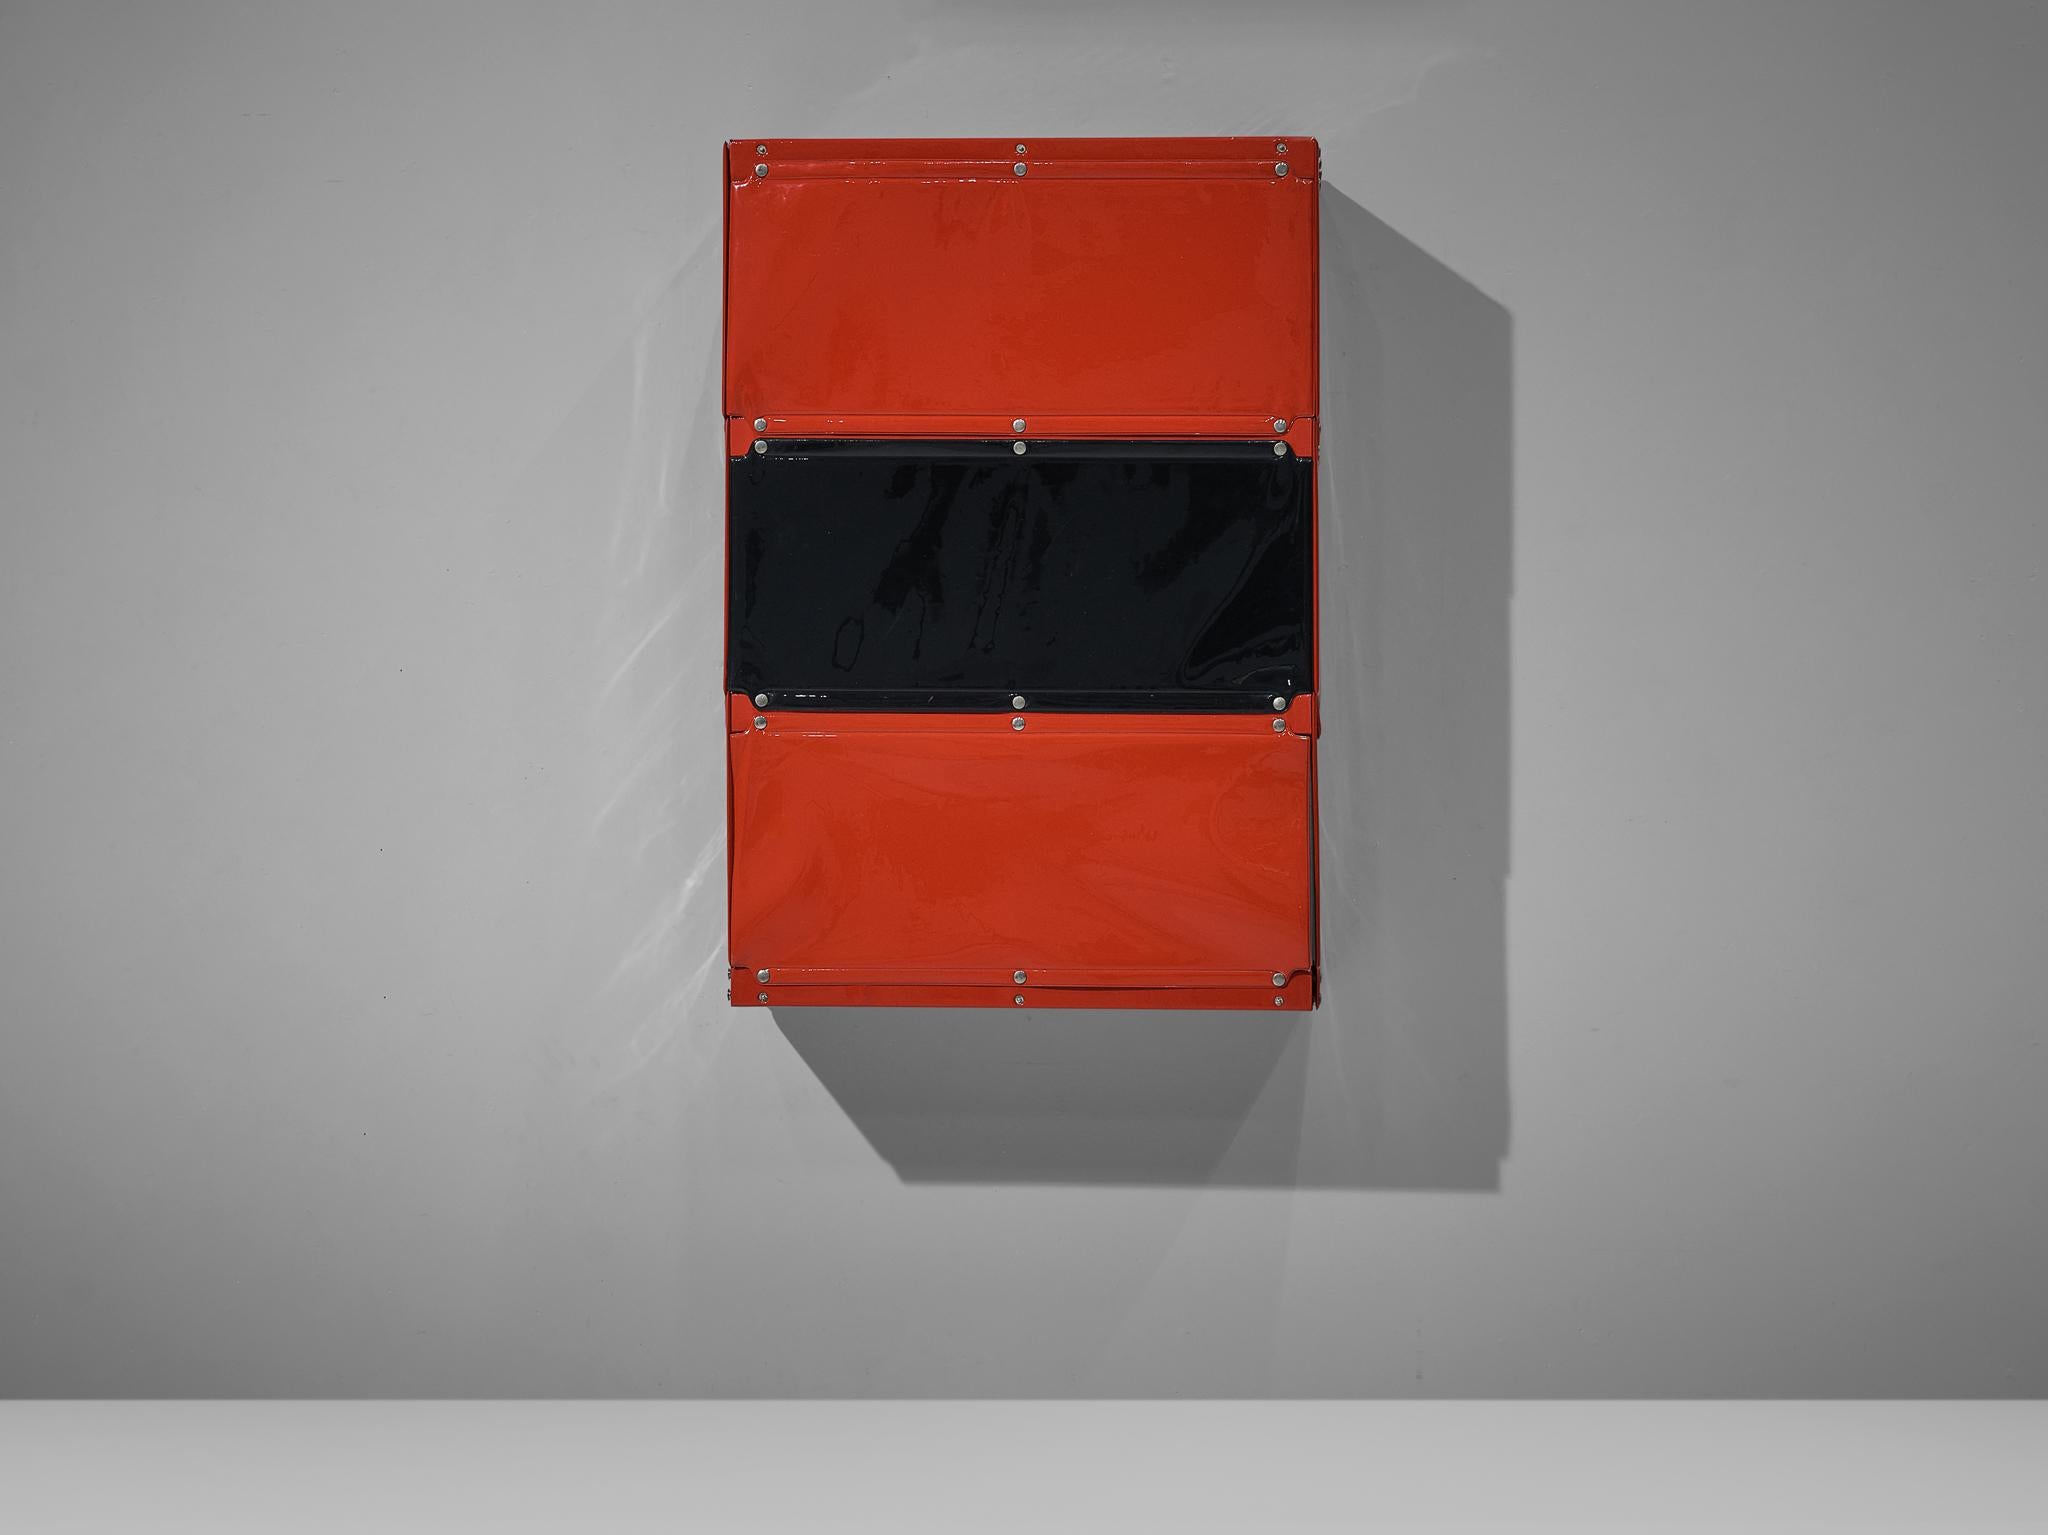 Metal Rare Otto Zapf 'Softline' Wall-Mounted Cabinets in Red and Black for Zapfdesign